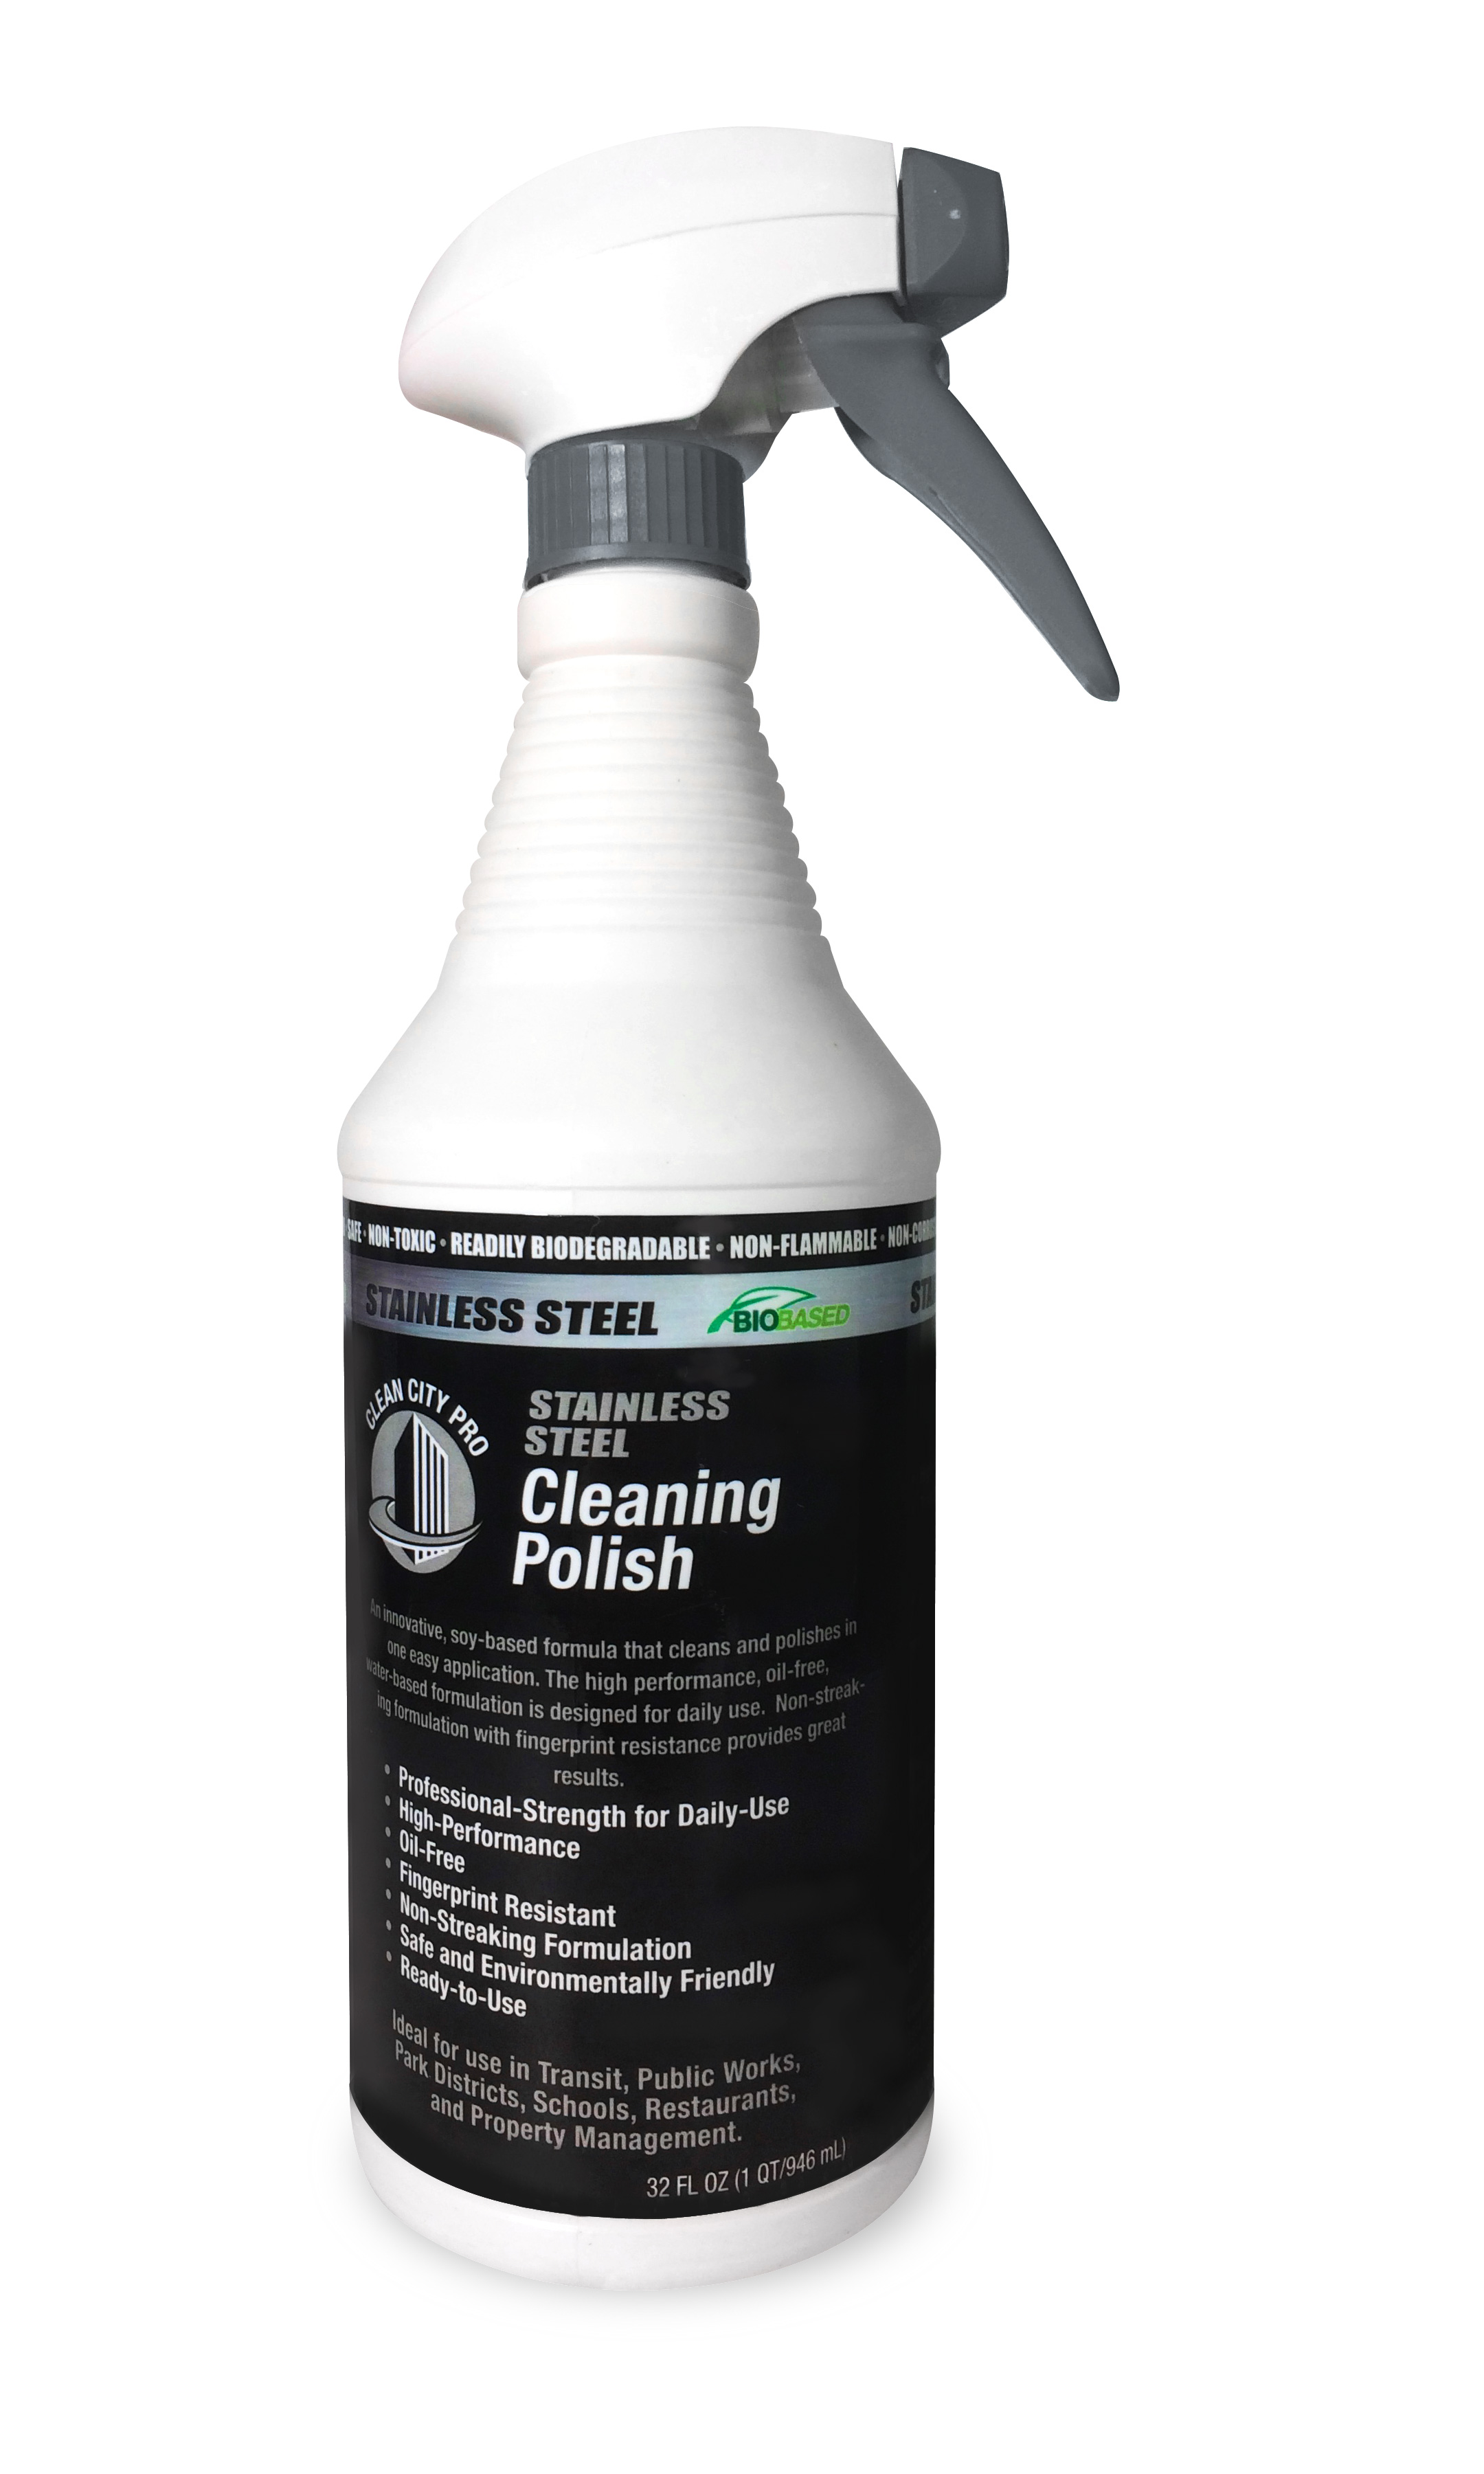 Stainless Steel Cleaner and Polish. High performance water-based